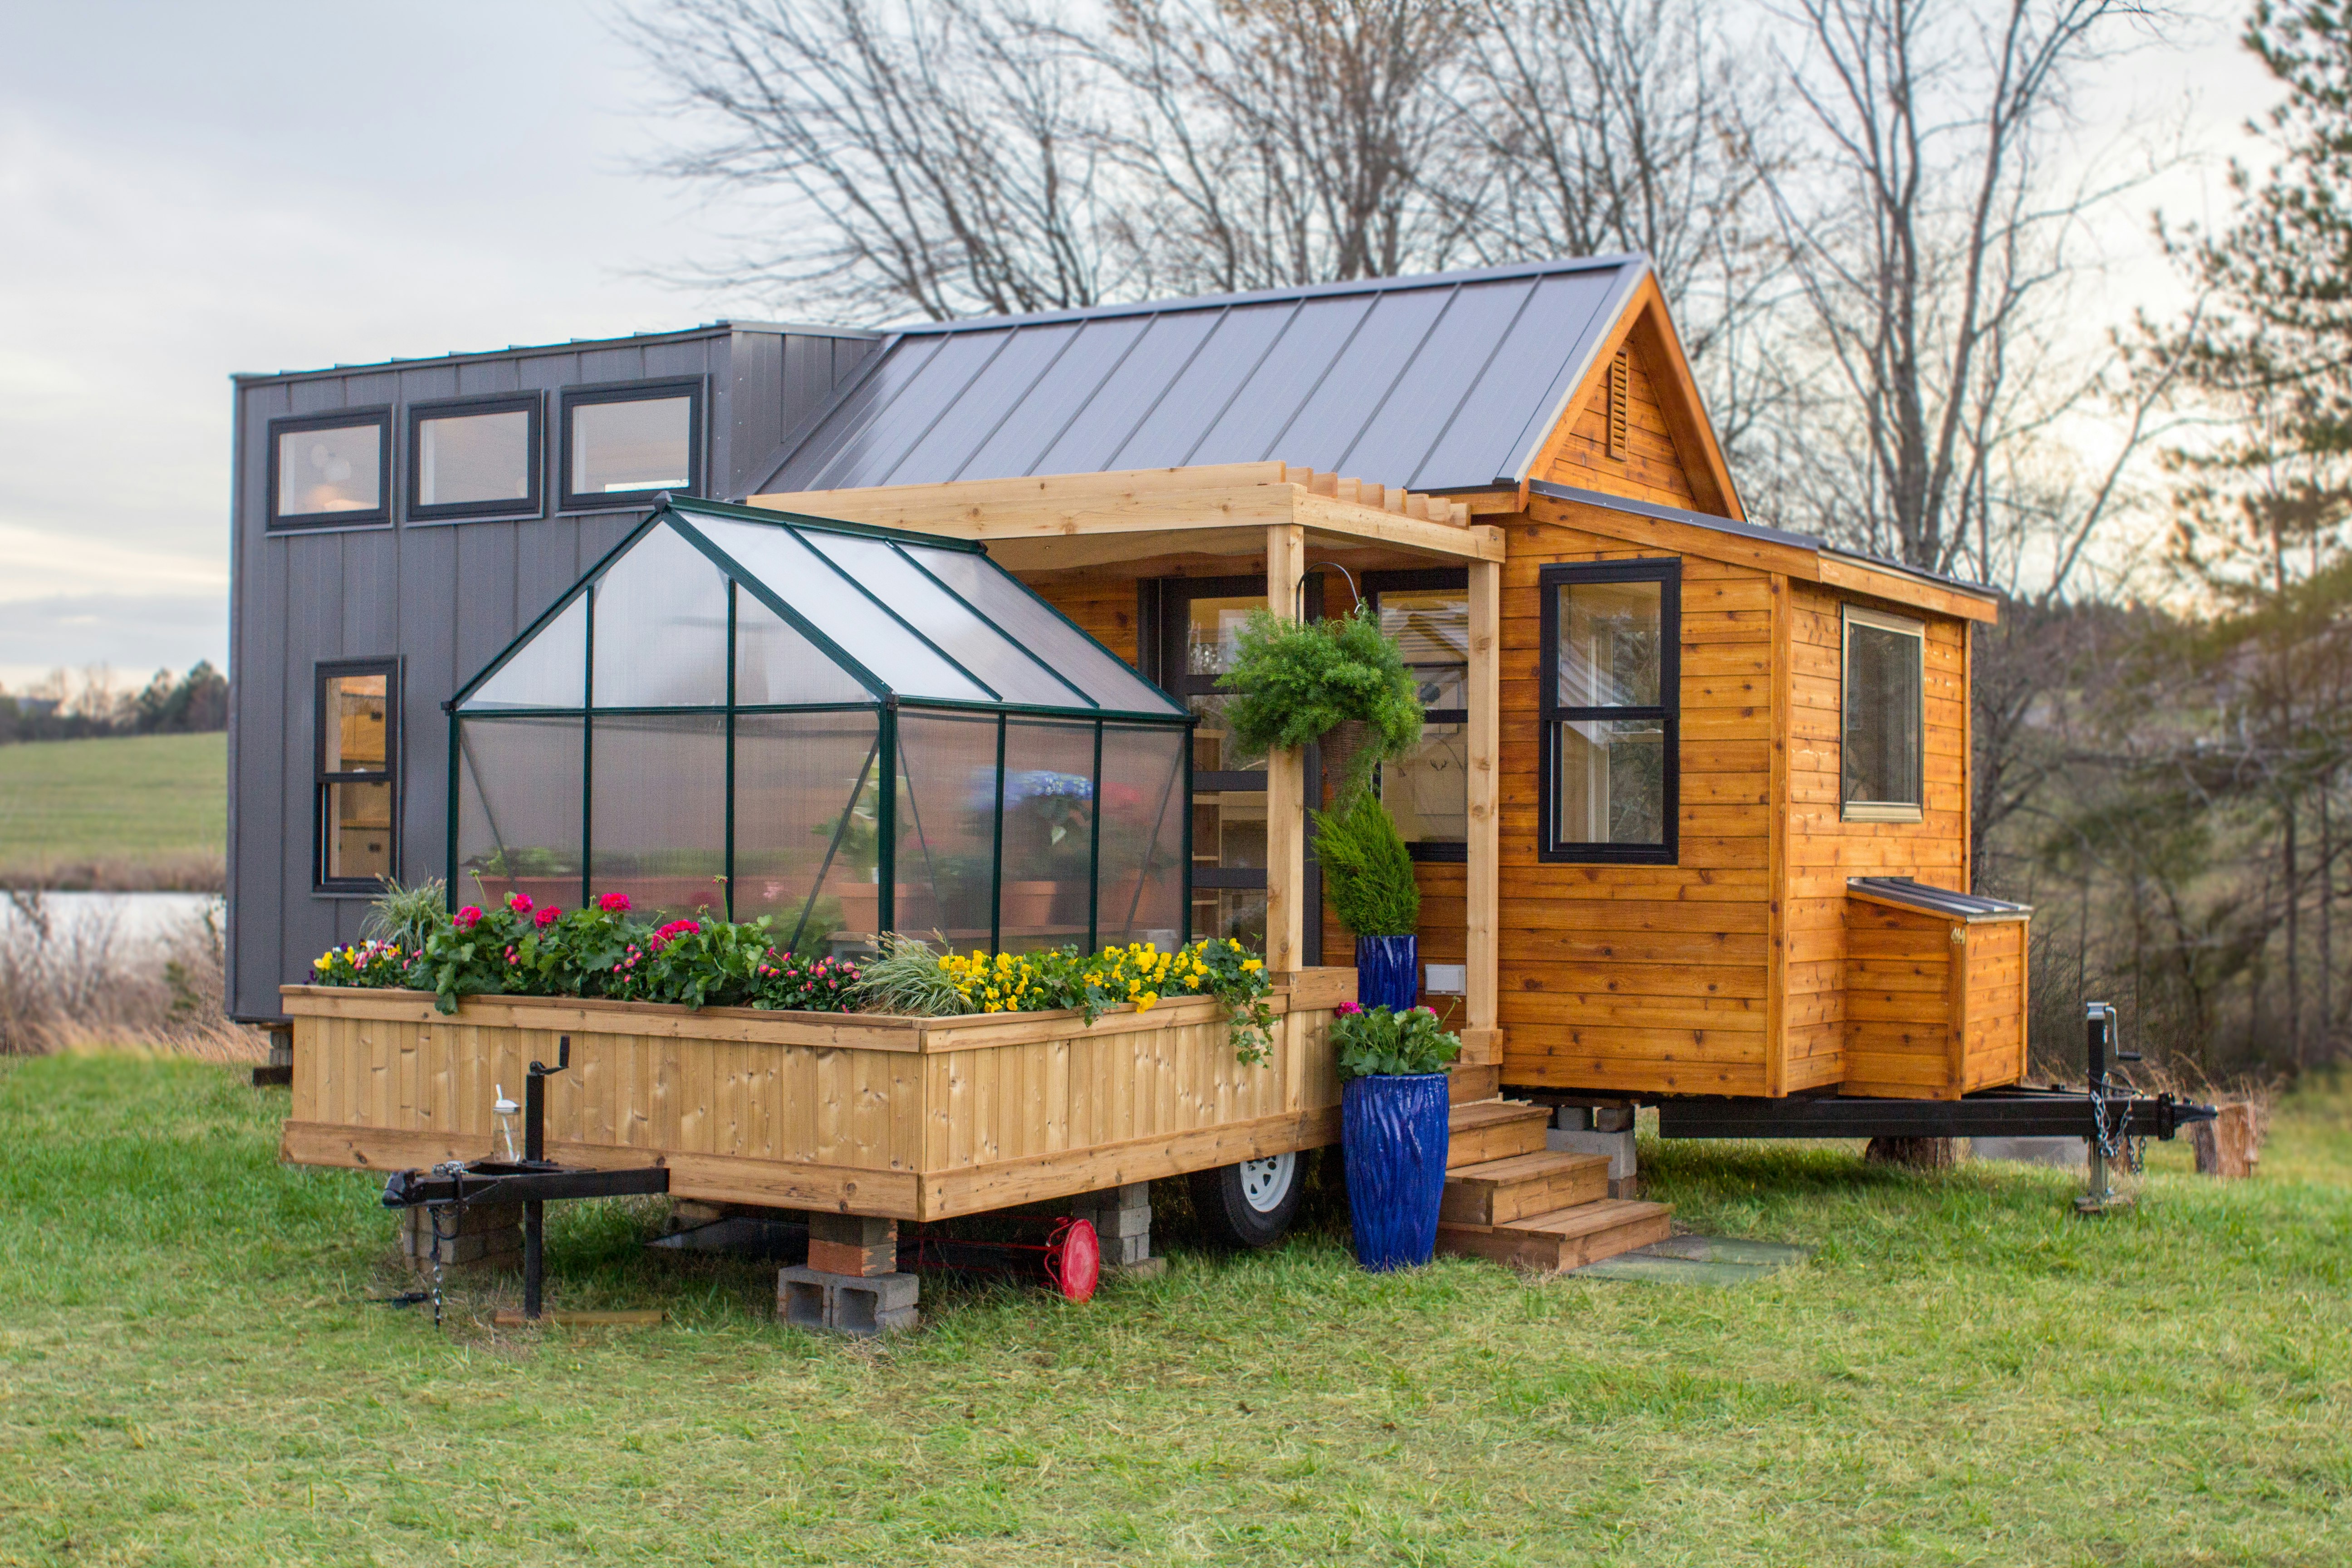 Tiny house comes with a greenhouse and porch - Curbed